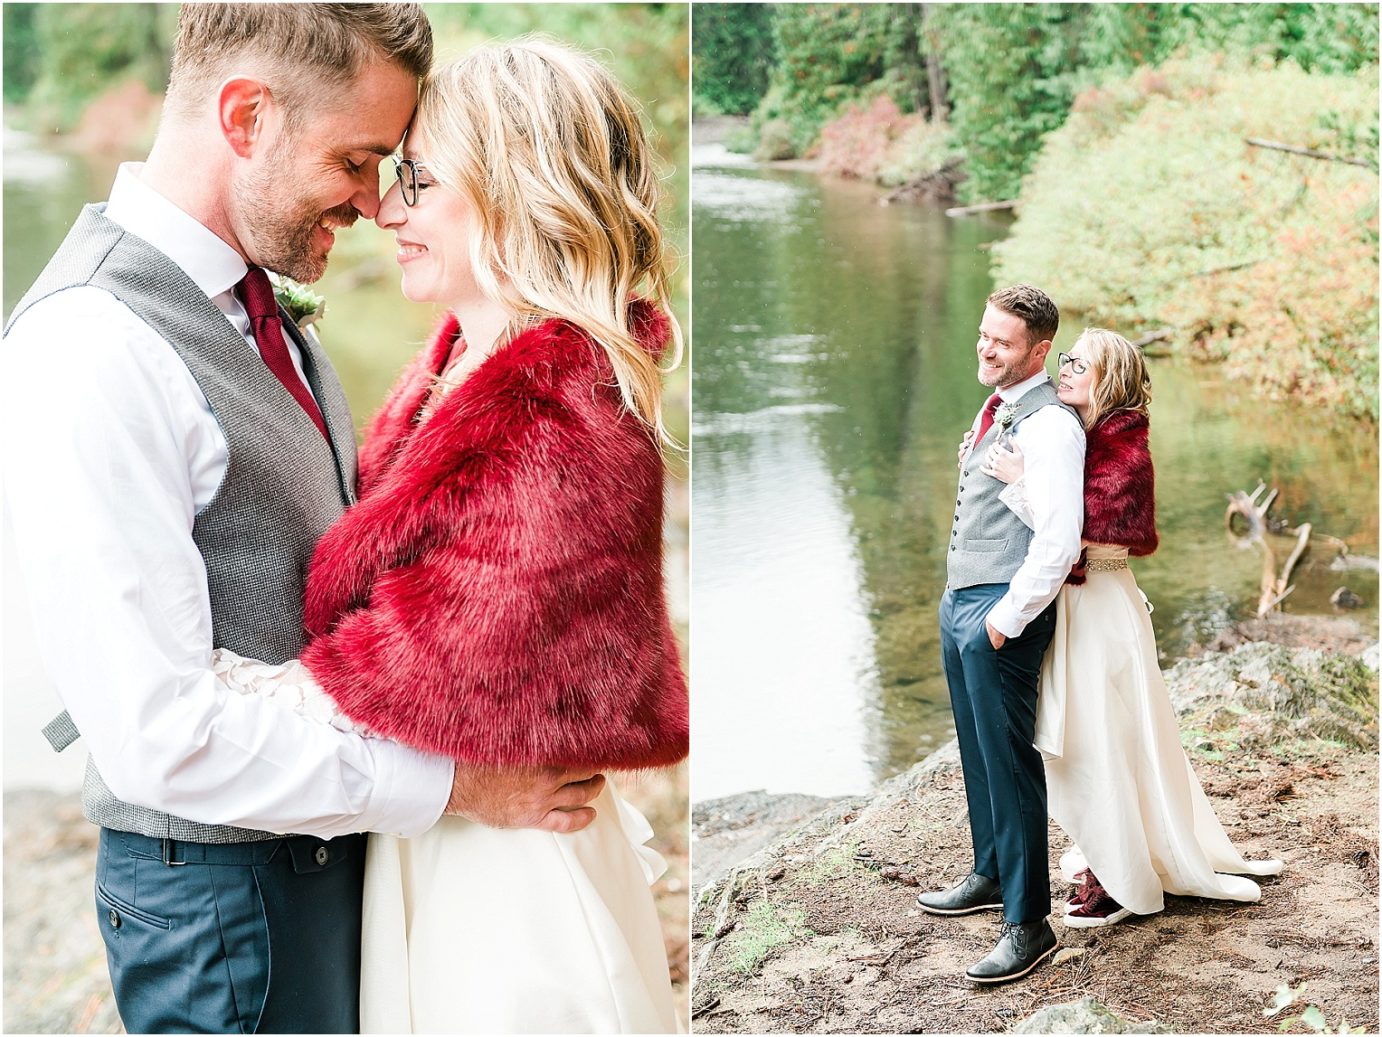 Intimate Leavenworth Elopement Rick and Tracey Leavenworth Photographer bride with fur shall